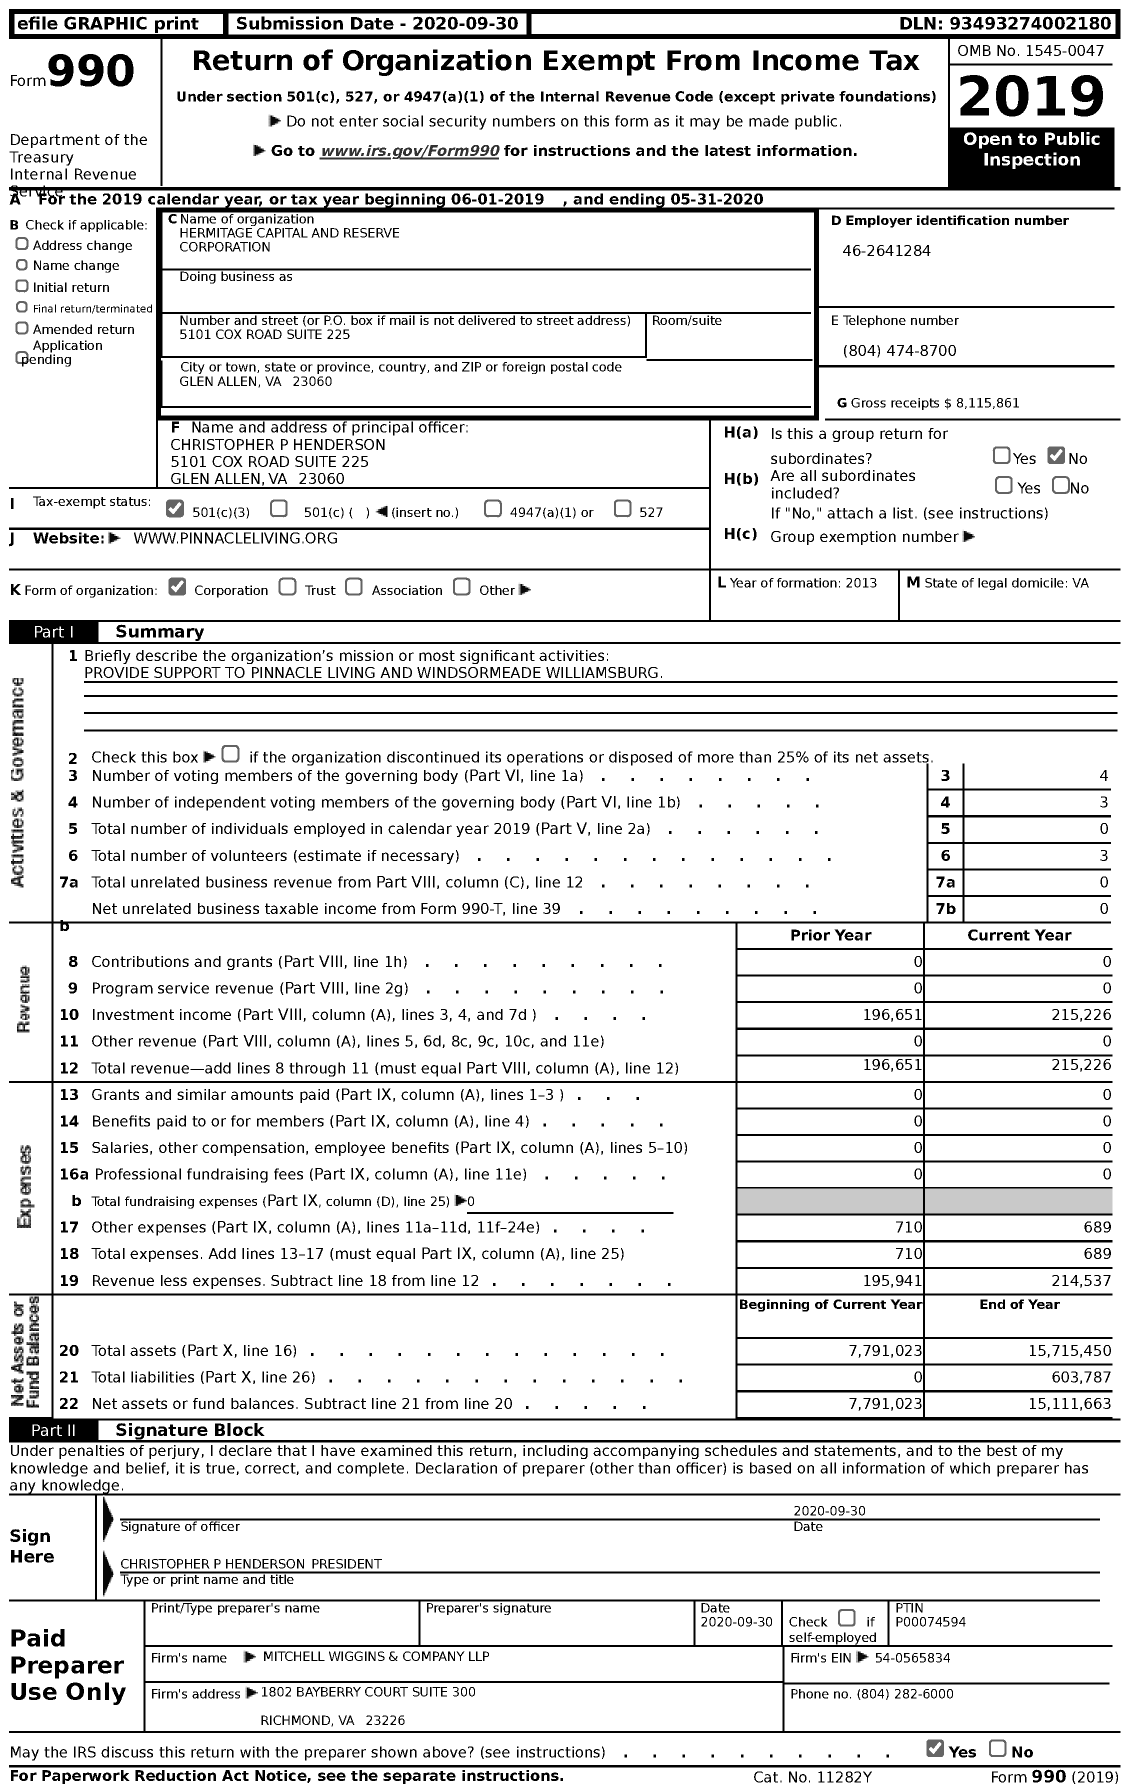 Image of first page of 2019 Form 990 for Hermitage Capital and Reserve Corporation